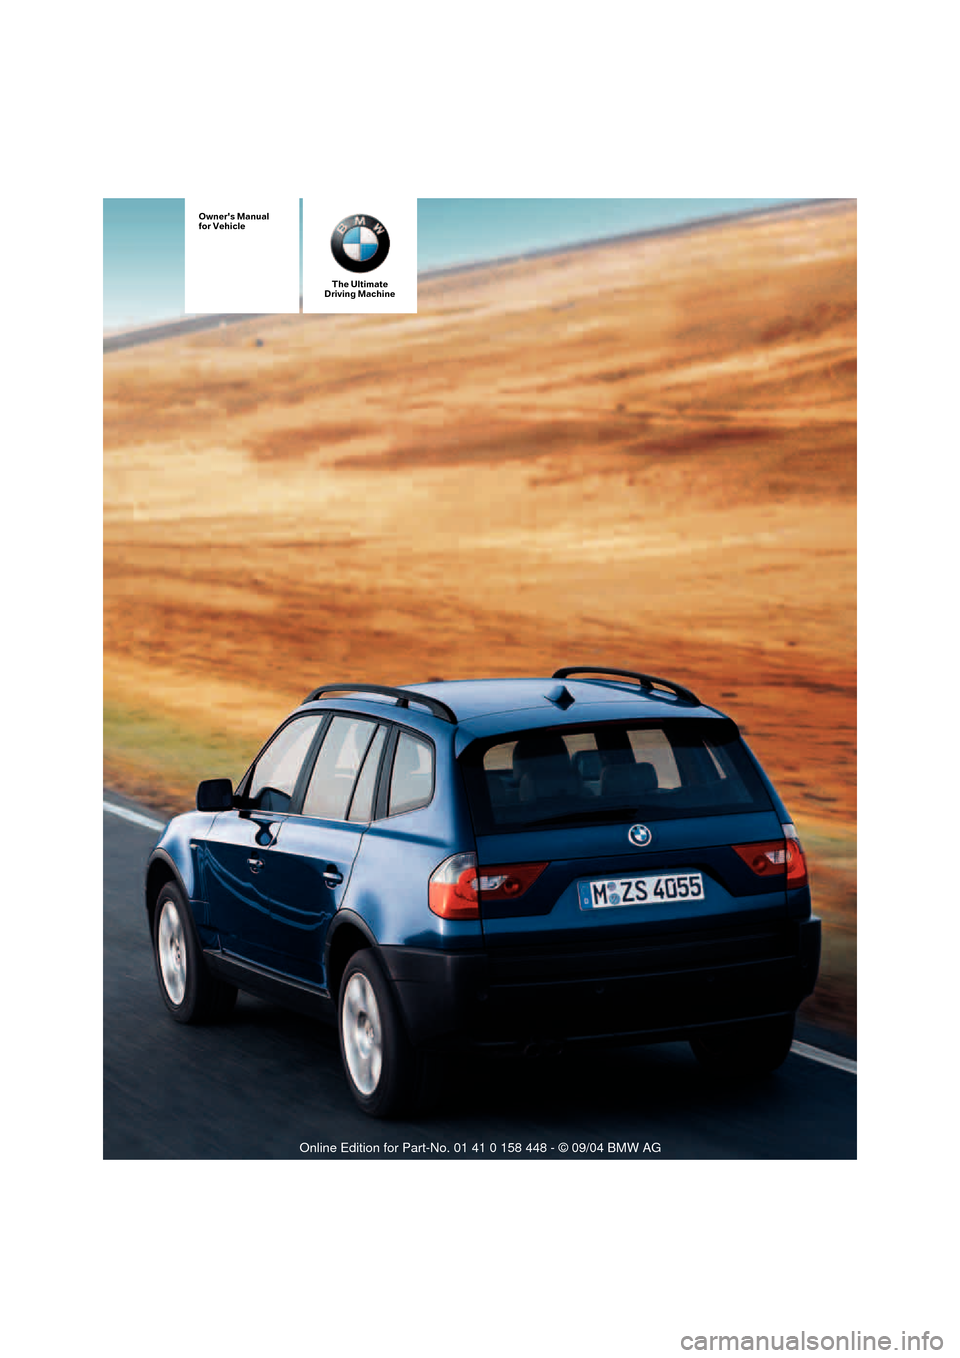 BMW X3 2.5I 2005 E83 Owners Manual The Ultimate
Driving Machine
Owners Manual
for Vehicle 